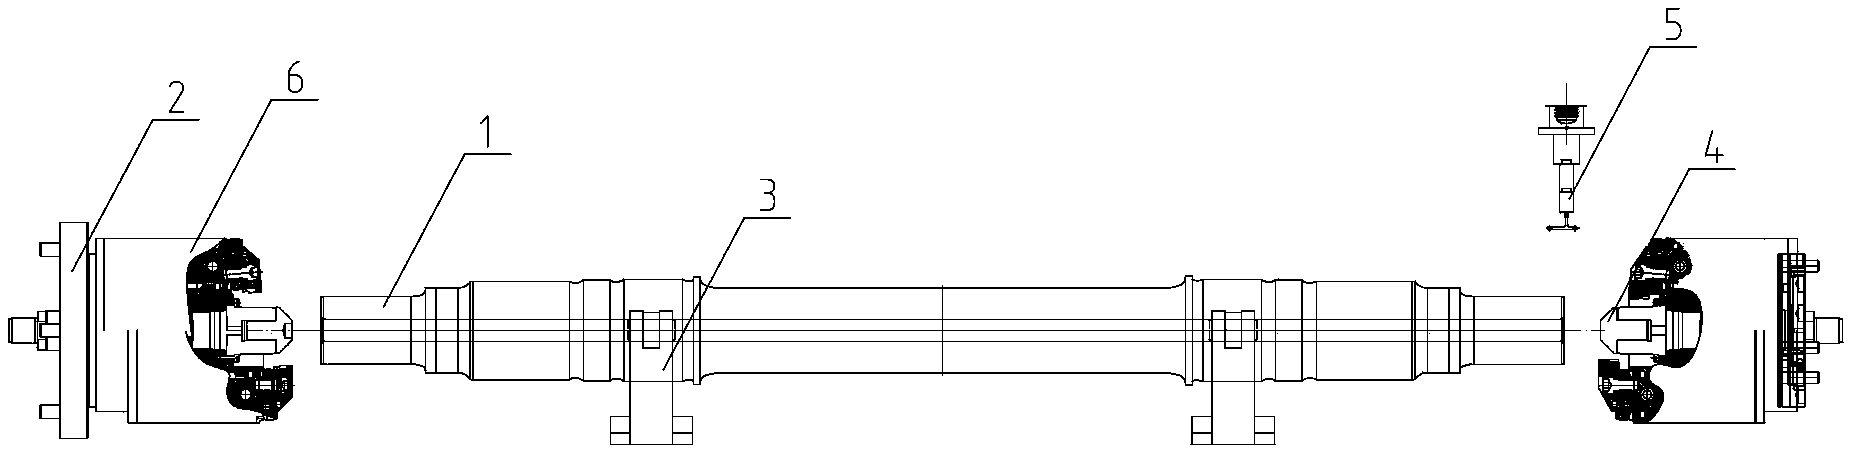 Automatic eccentric correcting method and device for machining hollow shaft